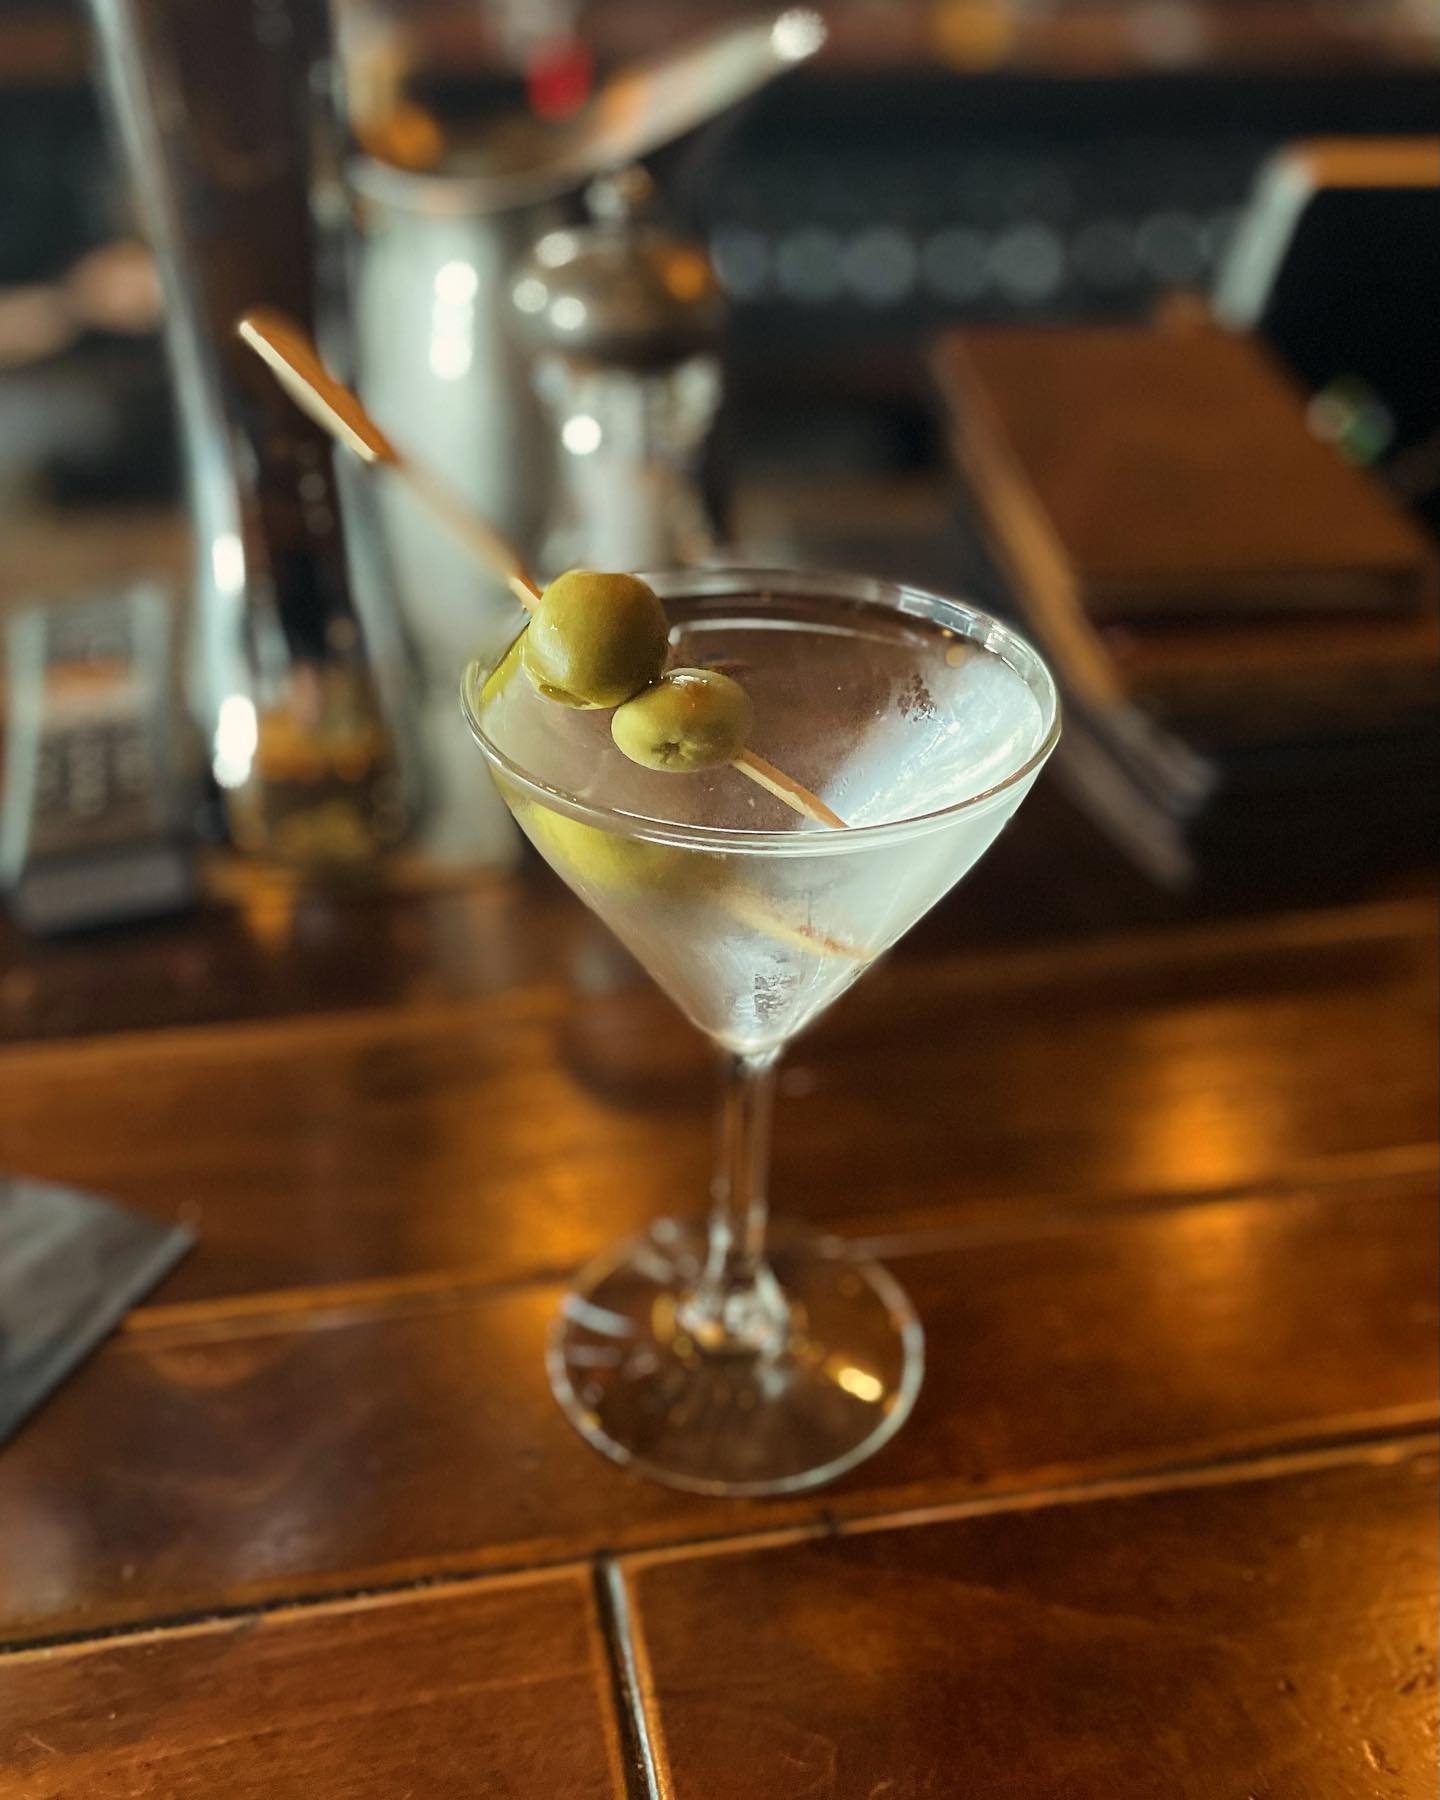 R&aacute;n Vodka Martini by @asado_tacoma . Our sea-salt touched vodka was made for this cocktail!🍸&hellip;which btw pairs well with all of the tasty bites offered at this Argentinian steakhouse in Tacoma. #T-Town #GrittyCity 
&hellip;
#Vodka #Marti